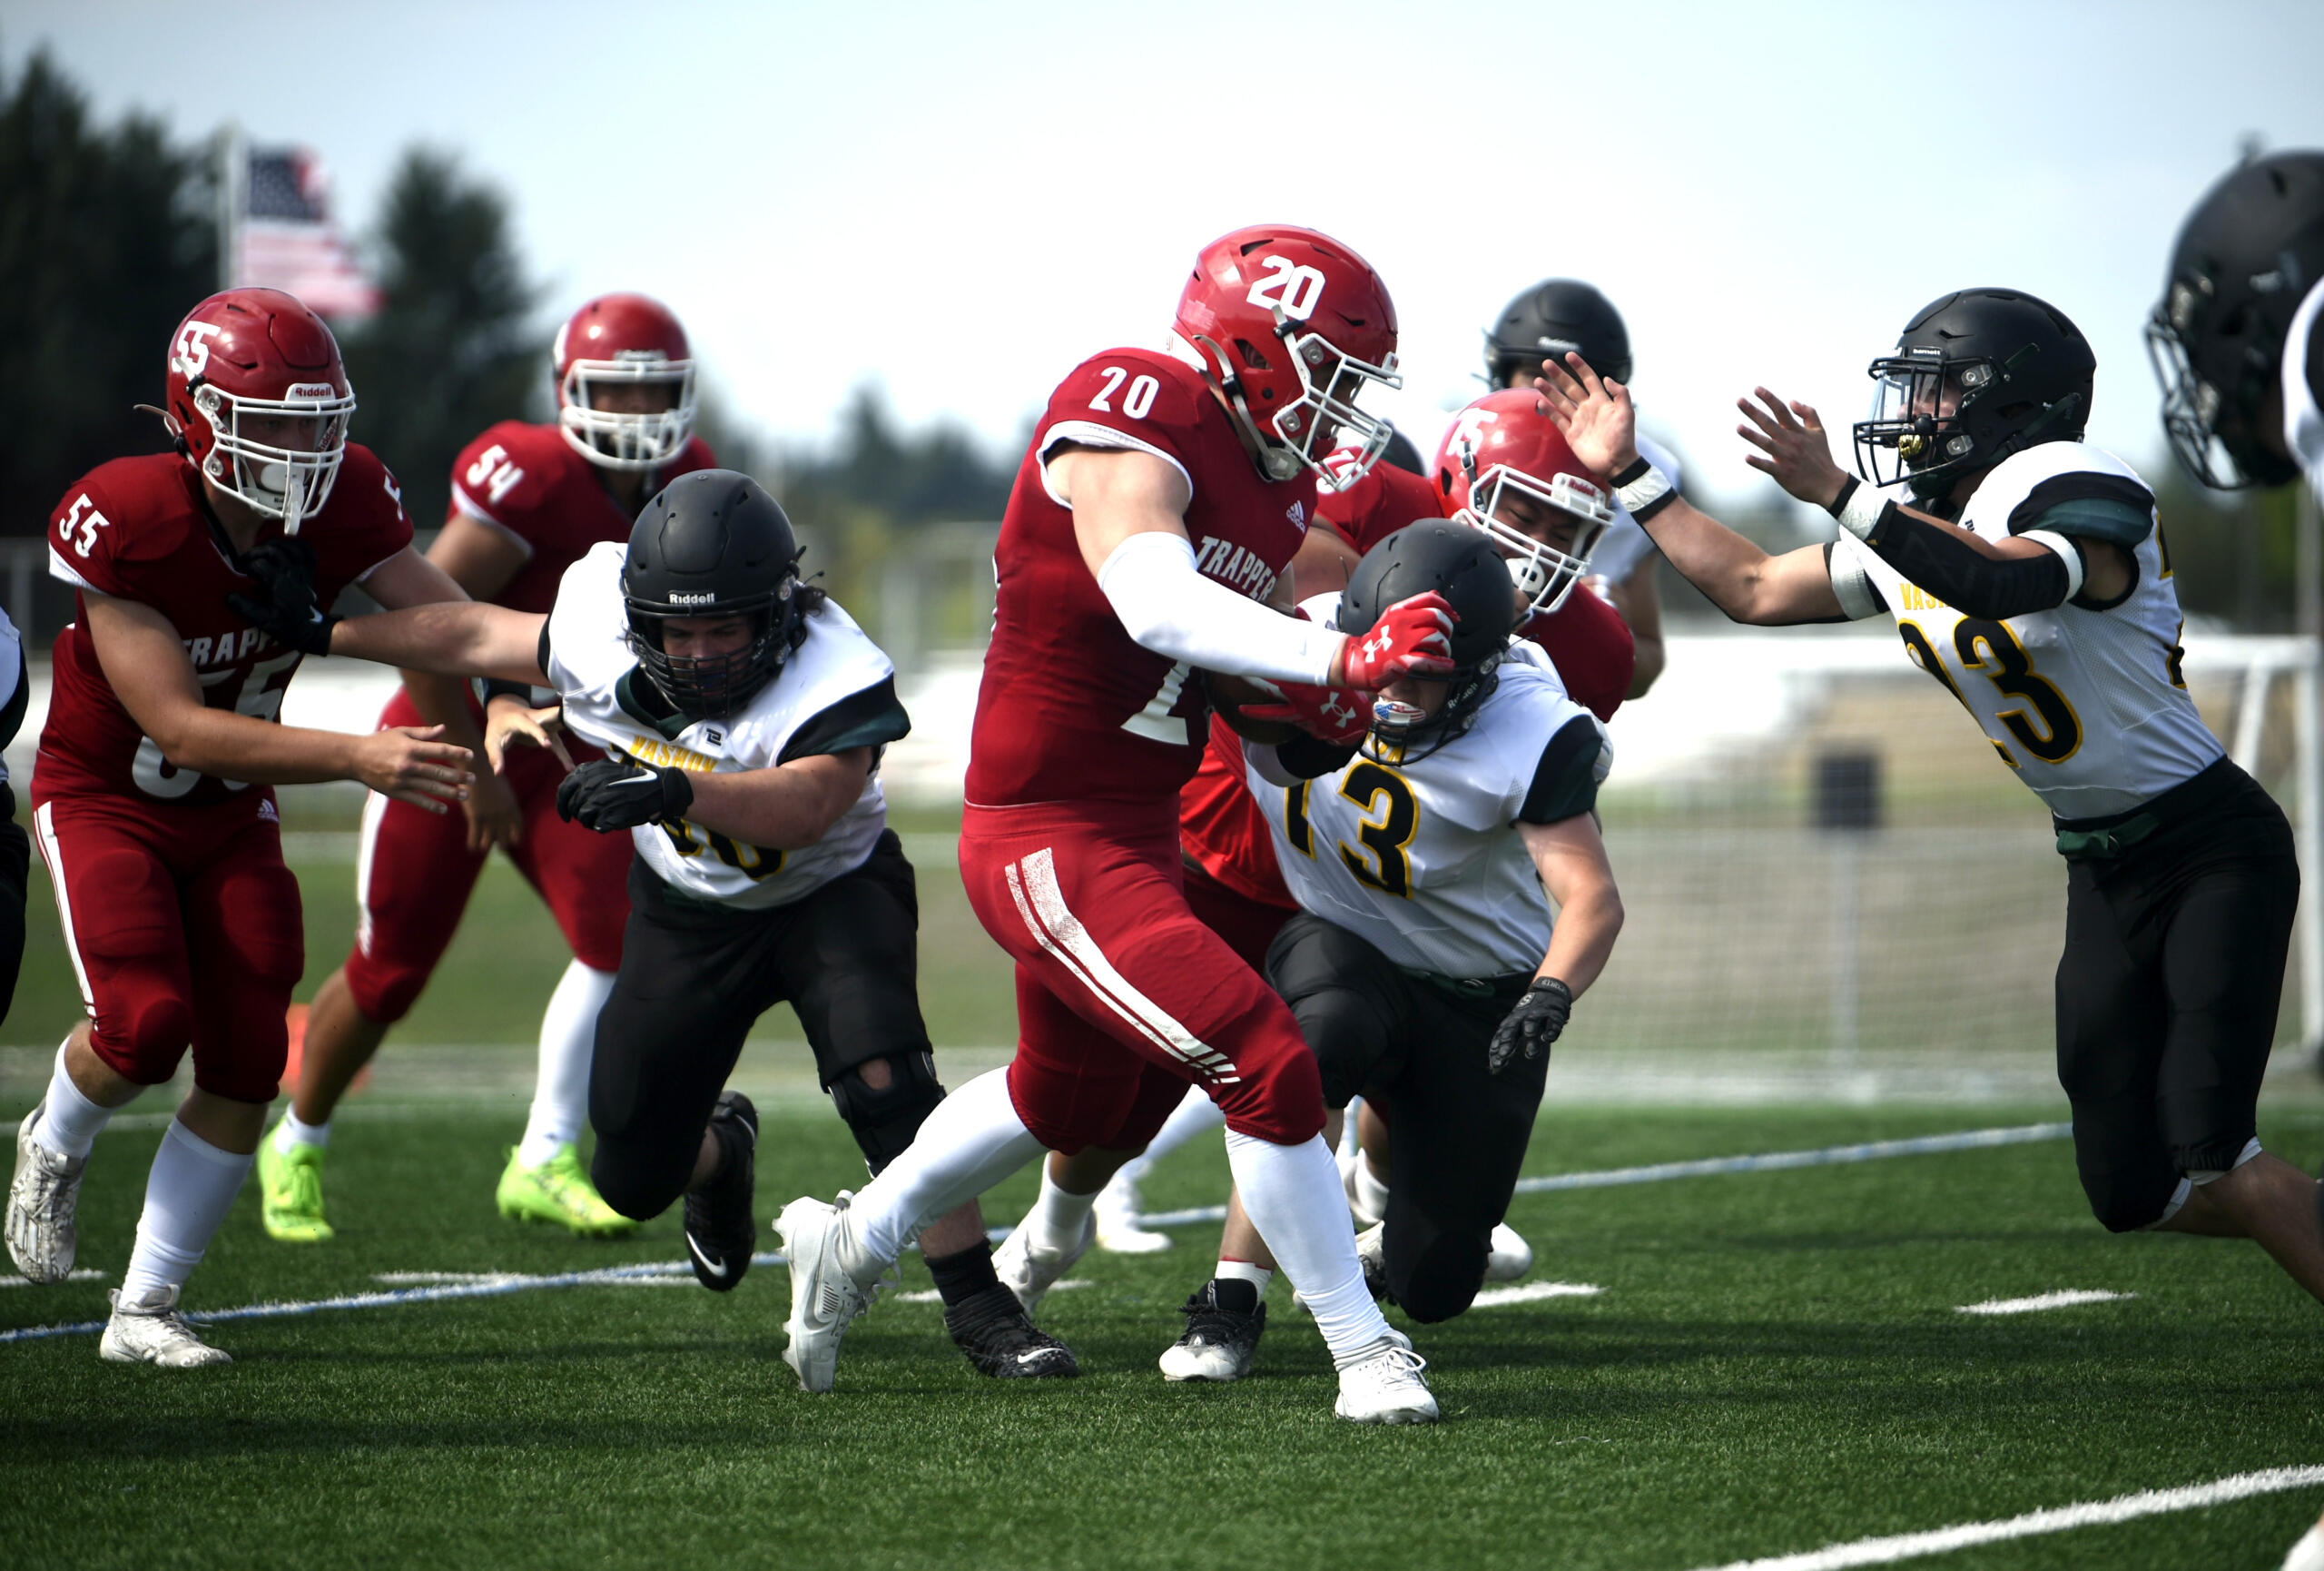 Fort Vancouver junior Denis Zayets runs ahead for extra yards against Vashon Island defenders on Saturday, Sept. 2, 2023, at Fort Vancouver High School.